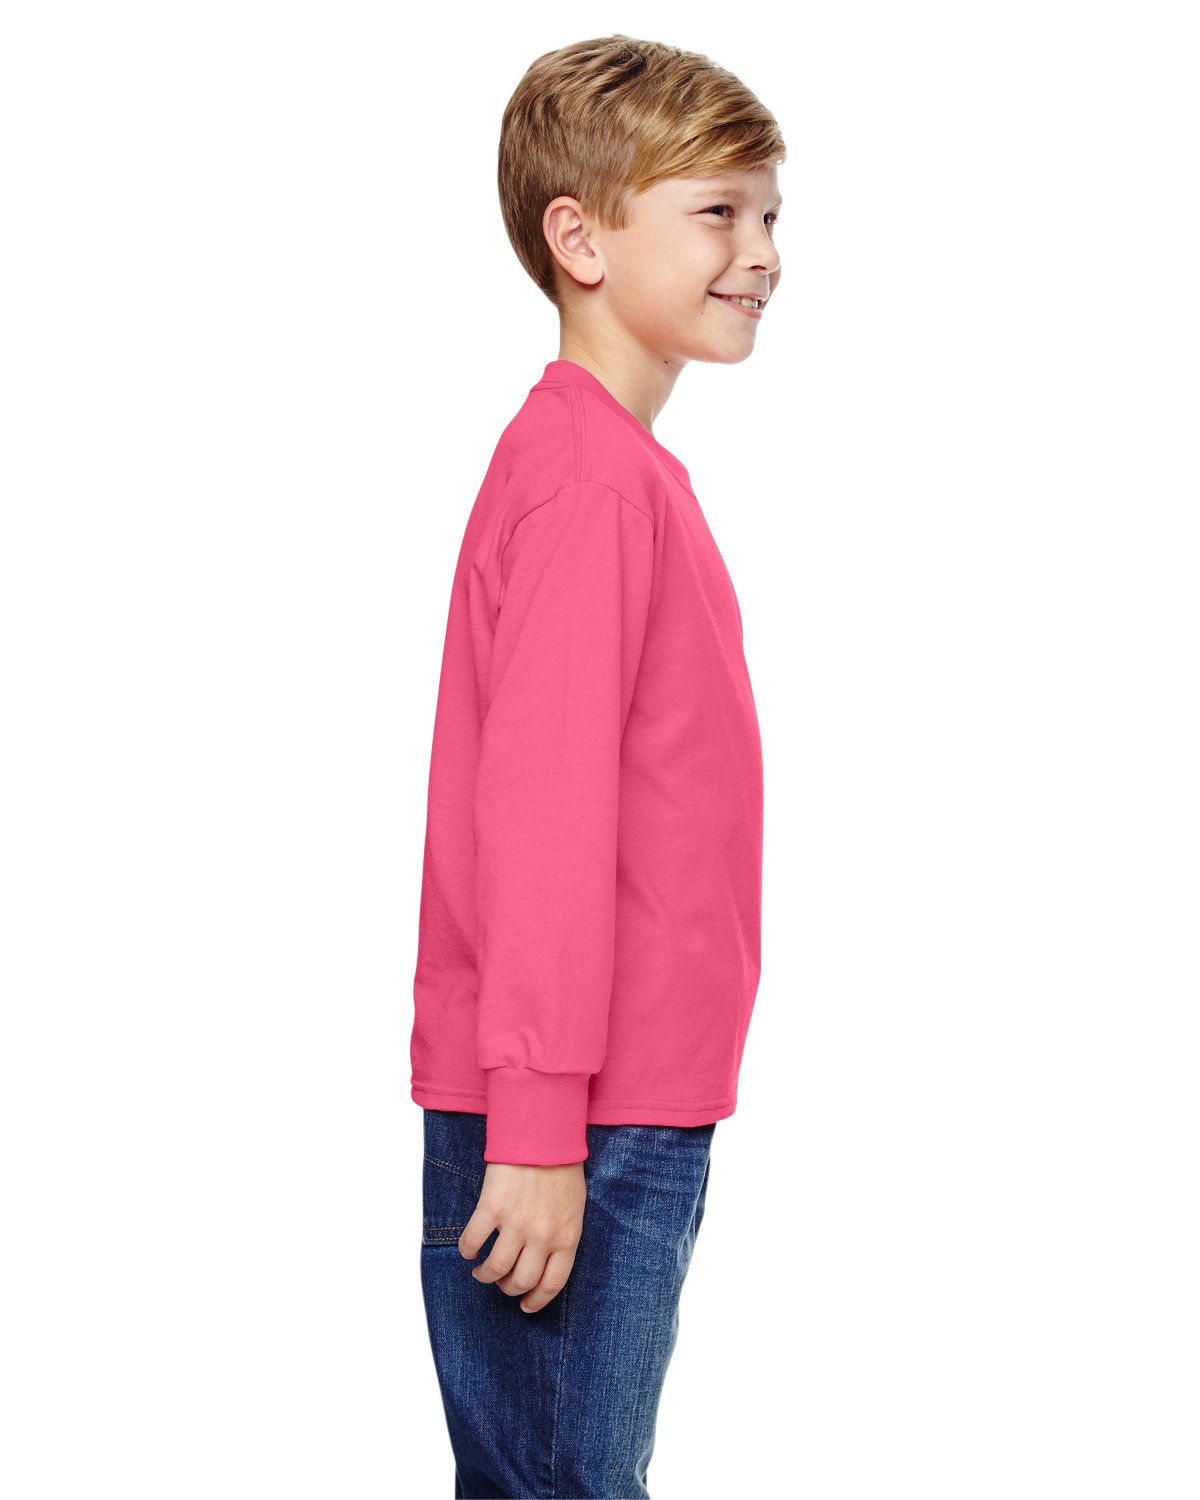 'Fruit of the Loom 4930B Youth HD Cotton Long-Sleeve T-Shirt'